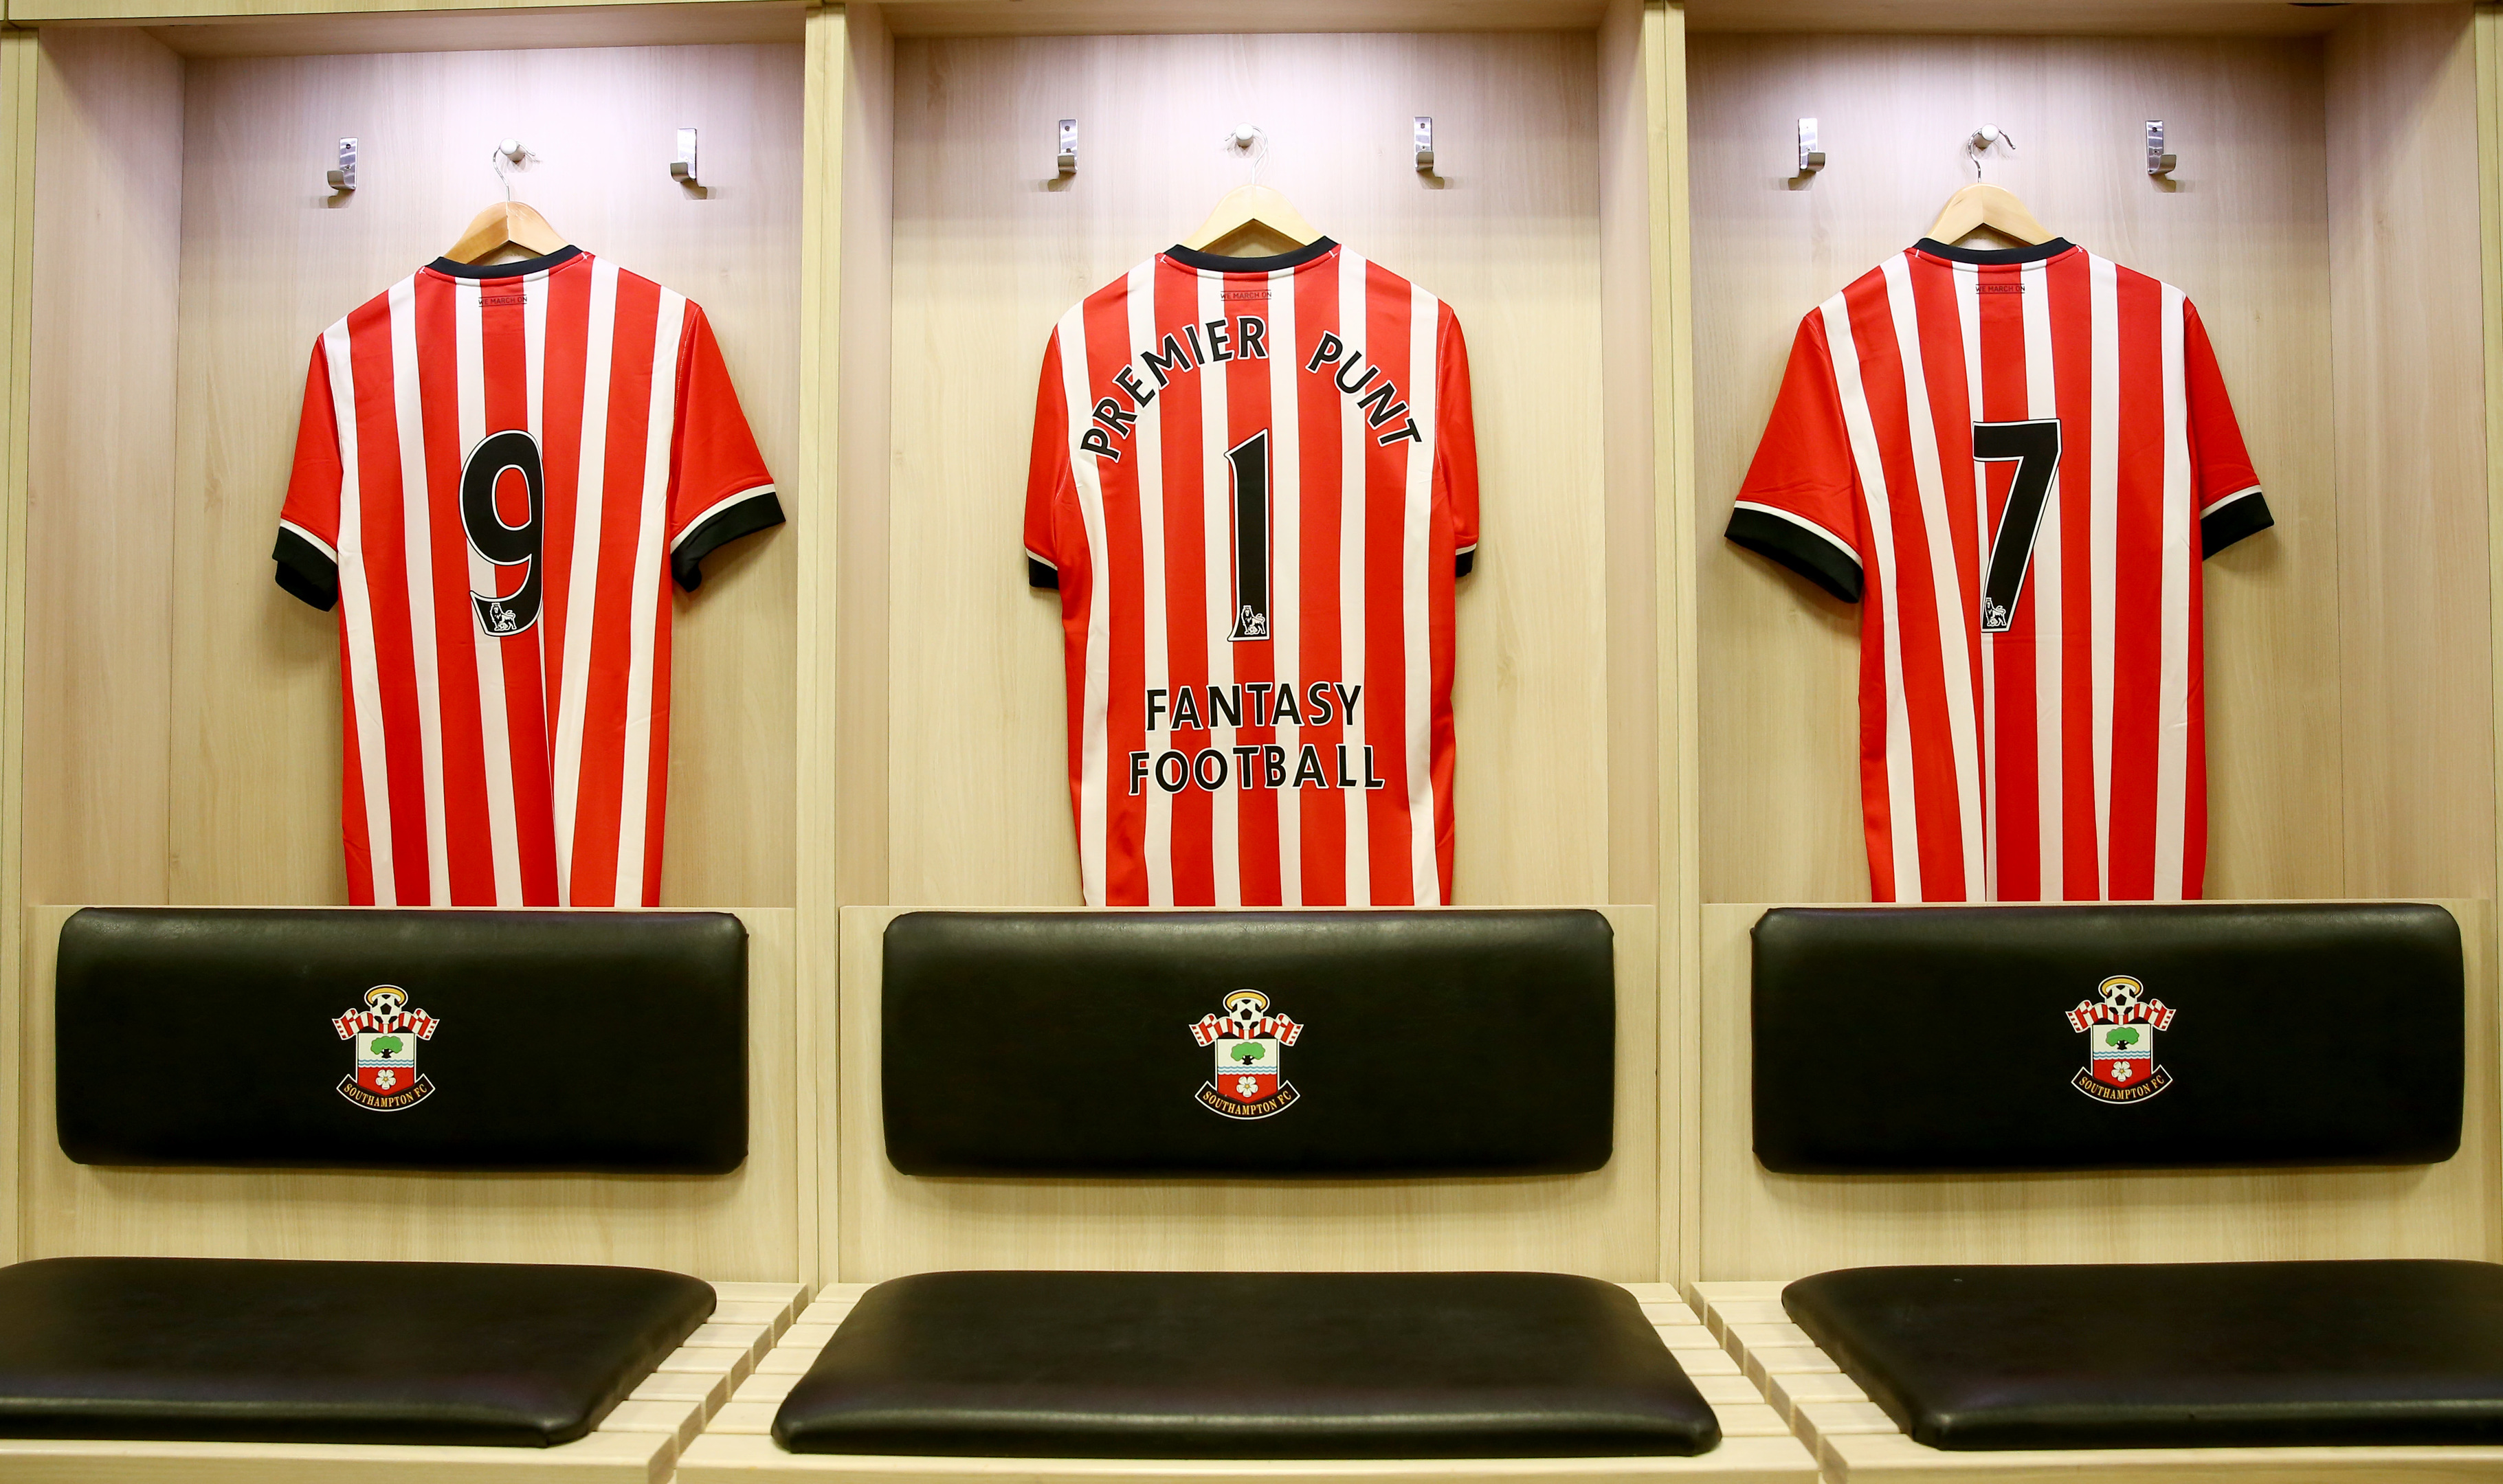 Premier Punt shirts hang in St Mary's dressing room